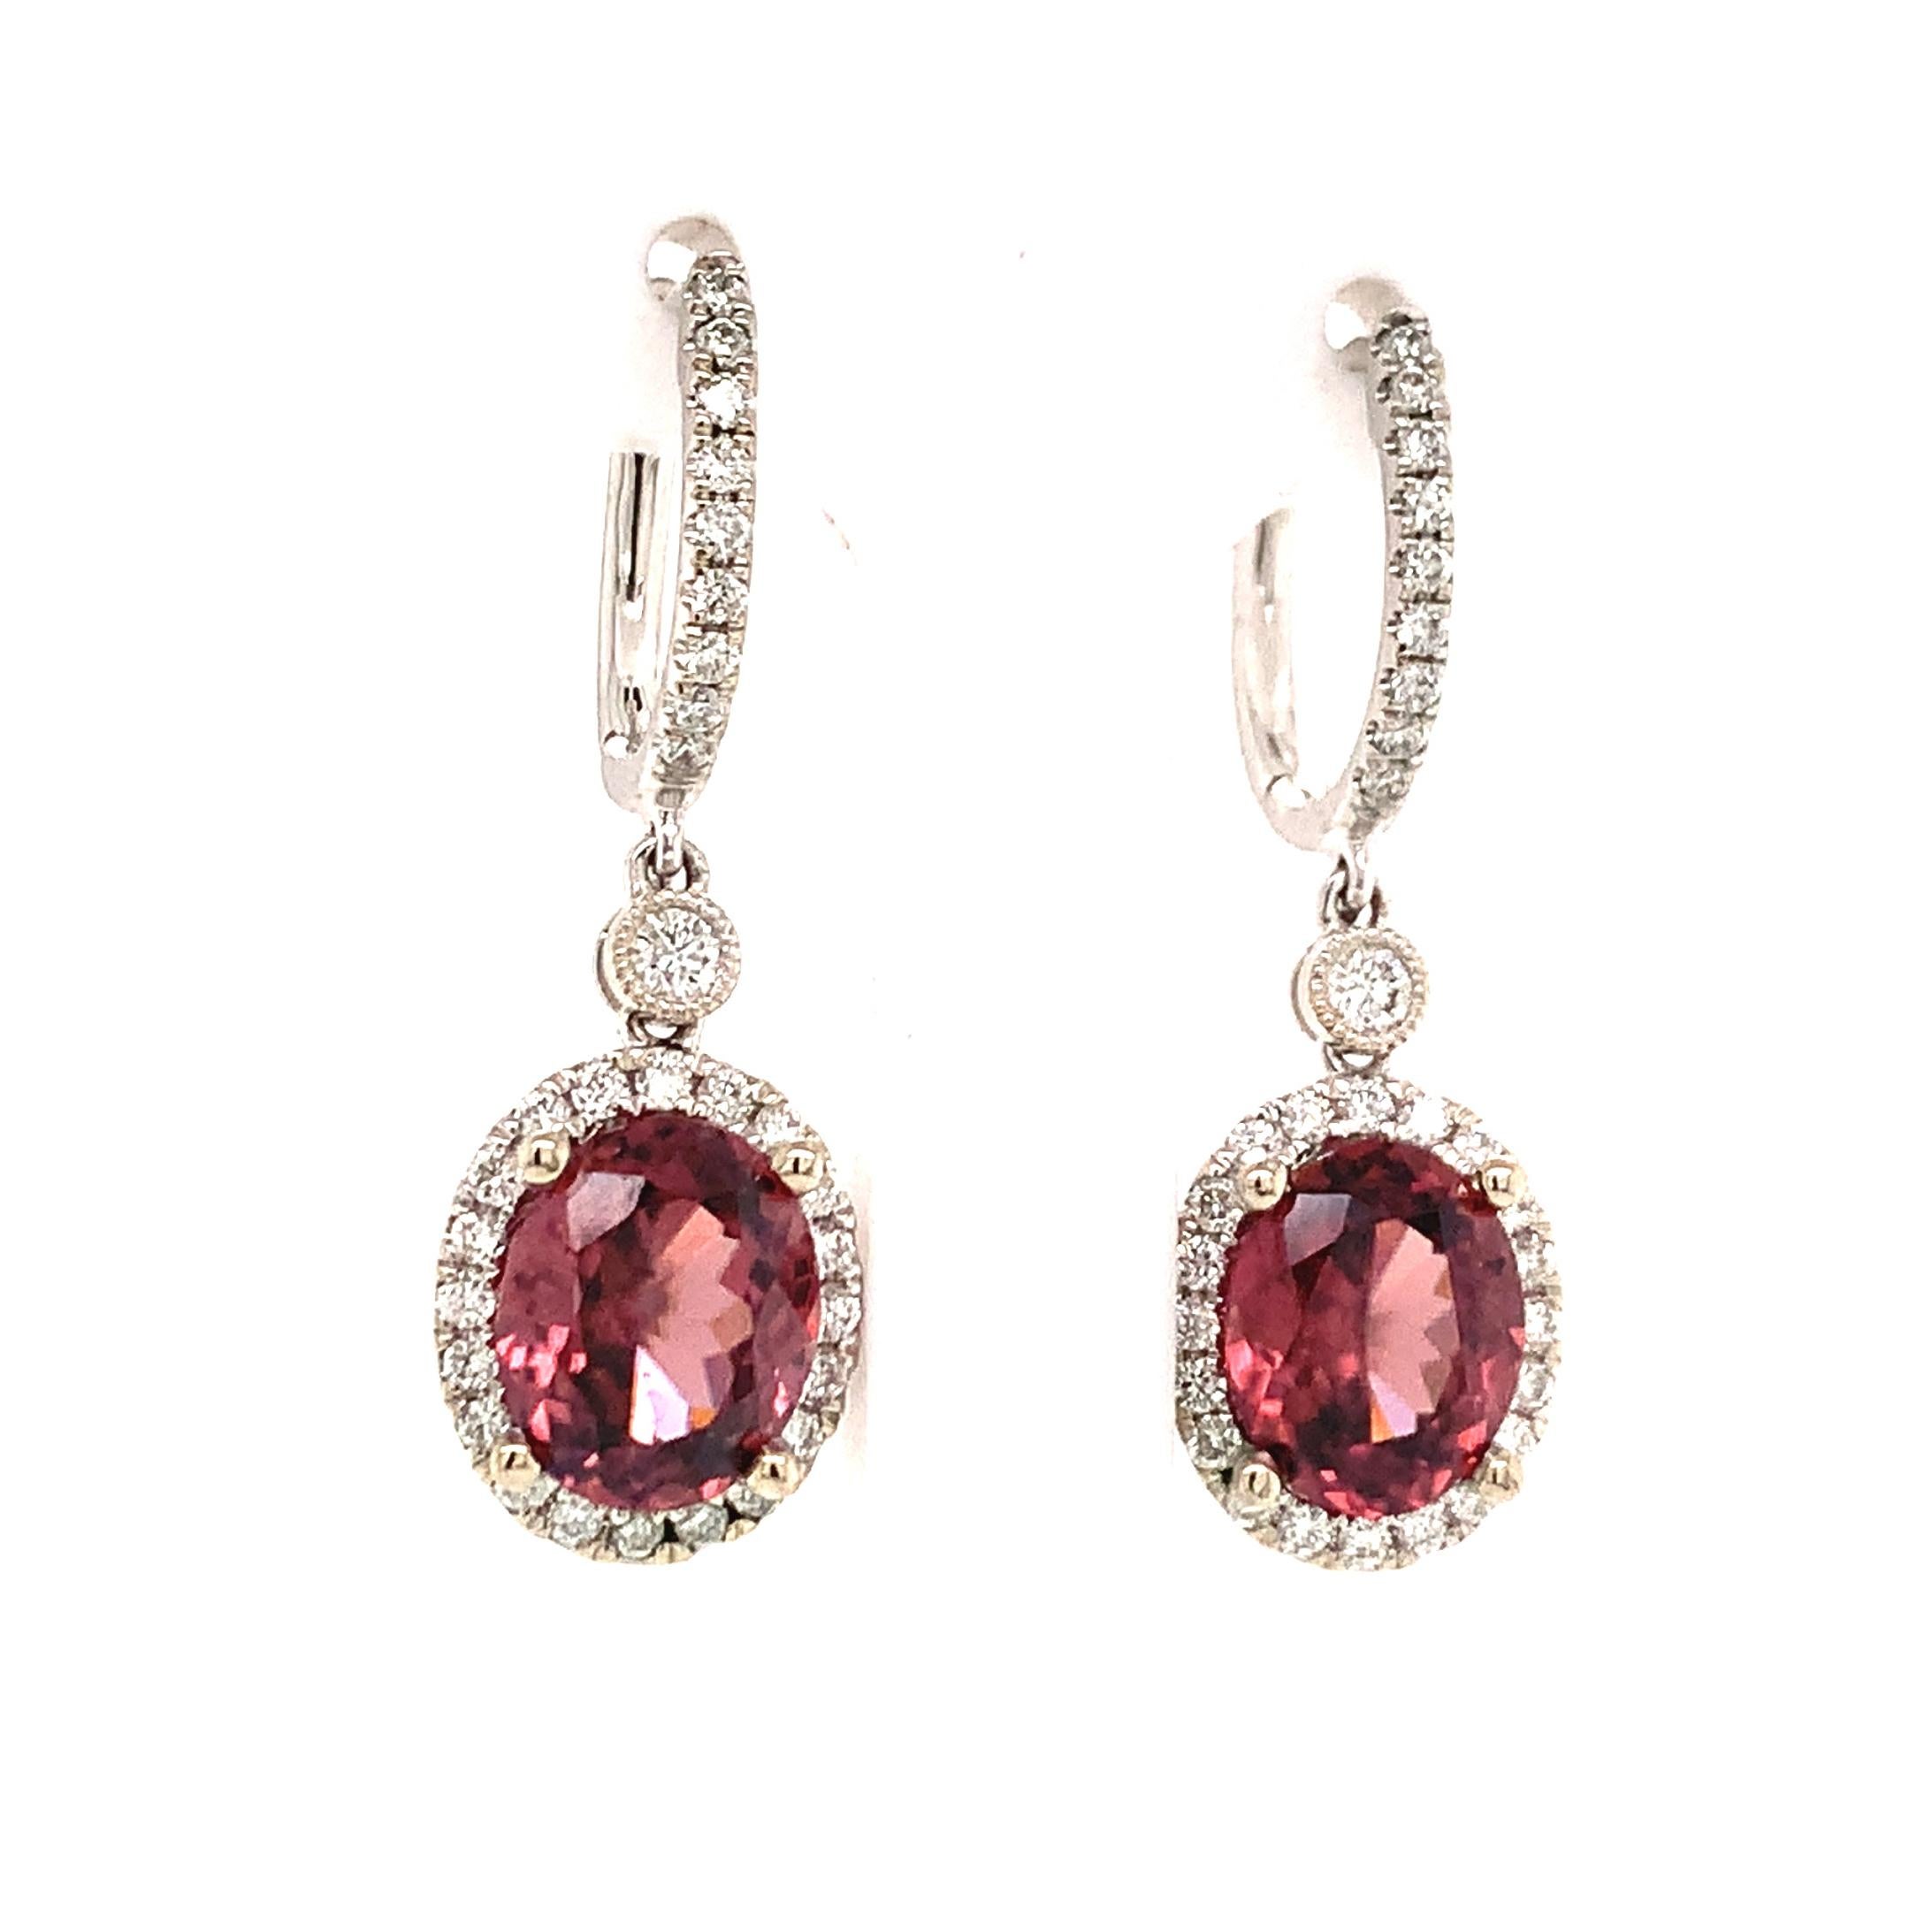 Natural Tourmaline Rubellite Diamond Earrings 18k Gold 6.62 TCW Certified For Sale 5